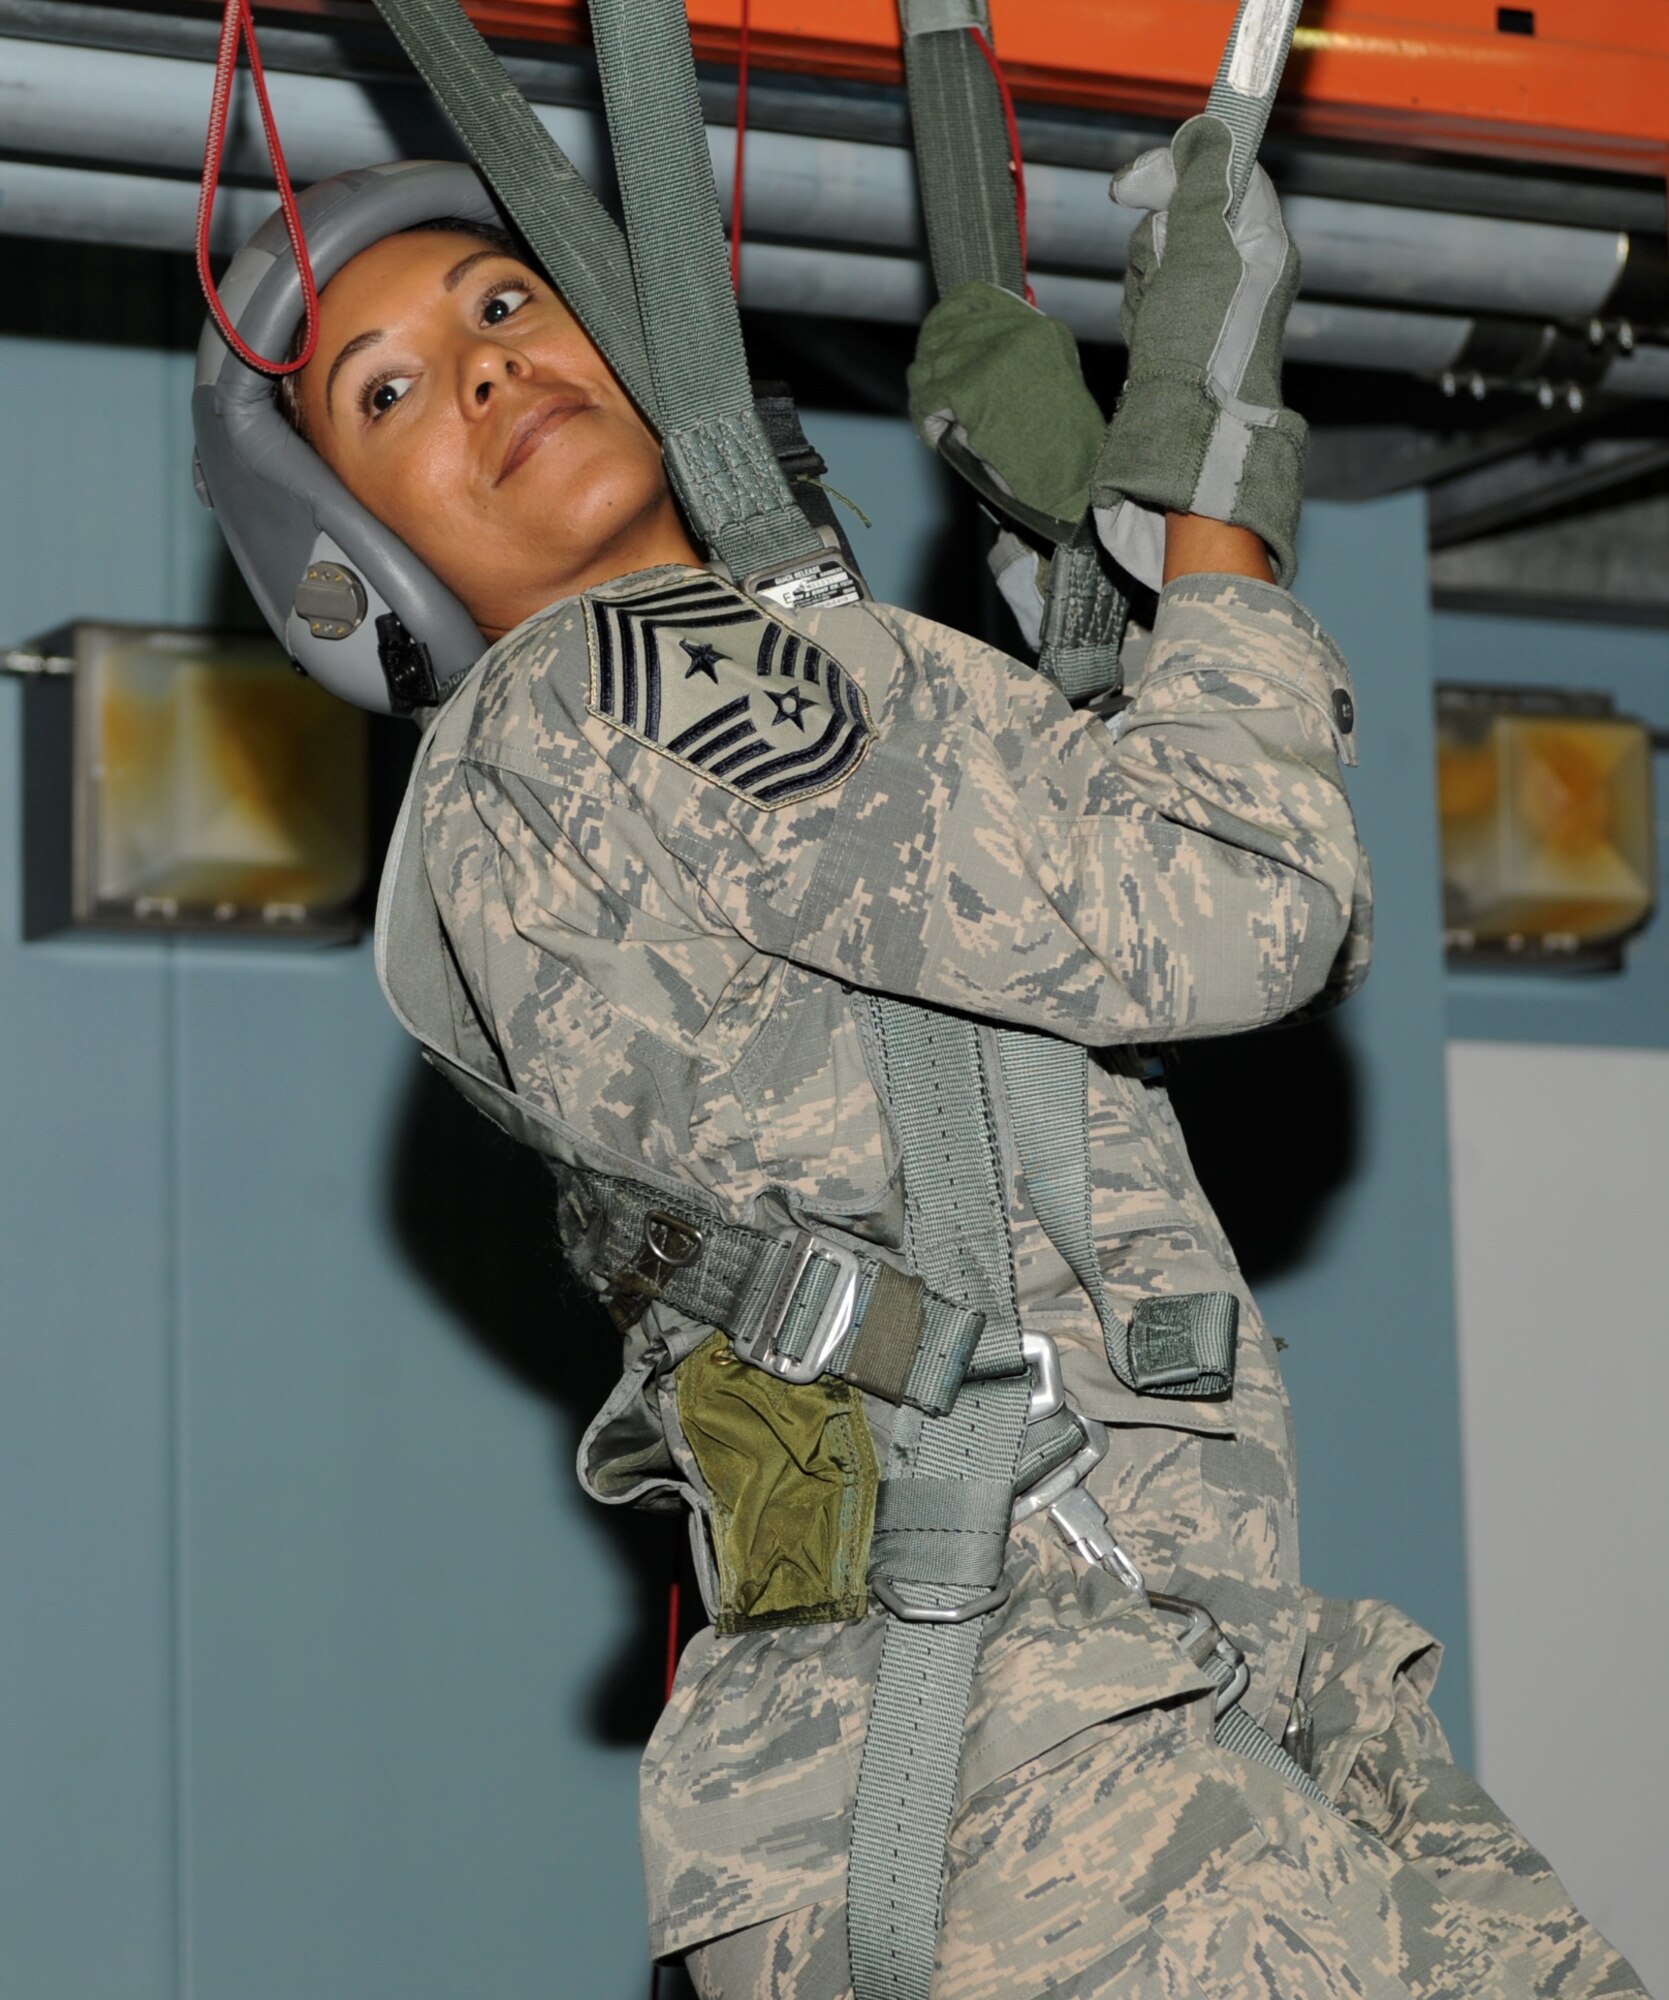 Chief Master Sgt. Sonia Lee, the command chief of the 28th Bomb Wing, practices different parachute steering methods as part of pre-flight training at Ellsworth Air Force Base, S.D., July 13, 2016. Lee learned how to identify different types of parachute malfunctions, how to fix them, and how to properly land after a fall. (U.S. Air Force photo by Airman 1st Class Denise M. Nevins)  